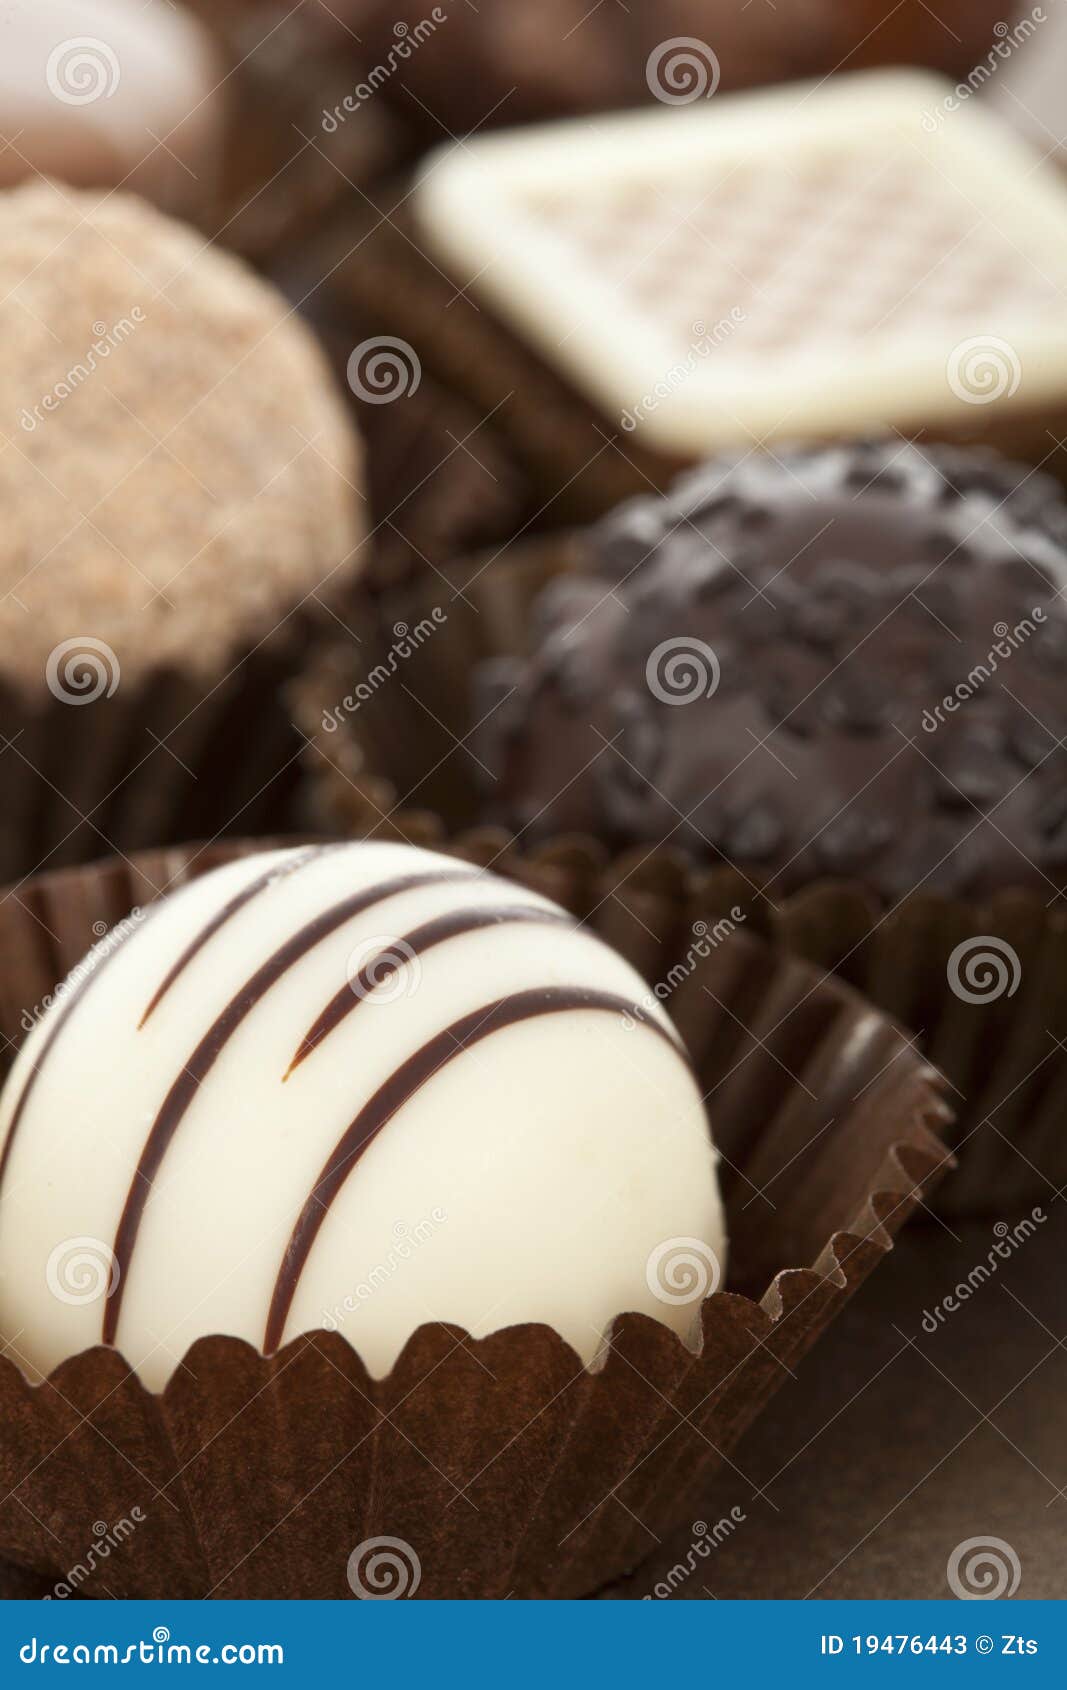 Assorted Chocolate Truffles Stock Image - Image of delicious ...